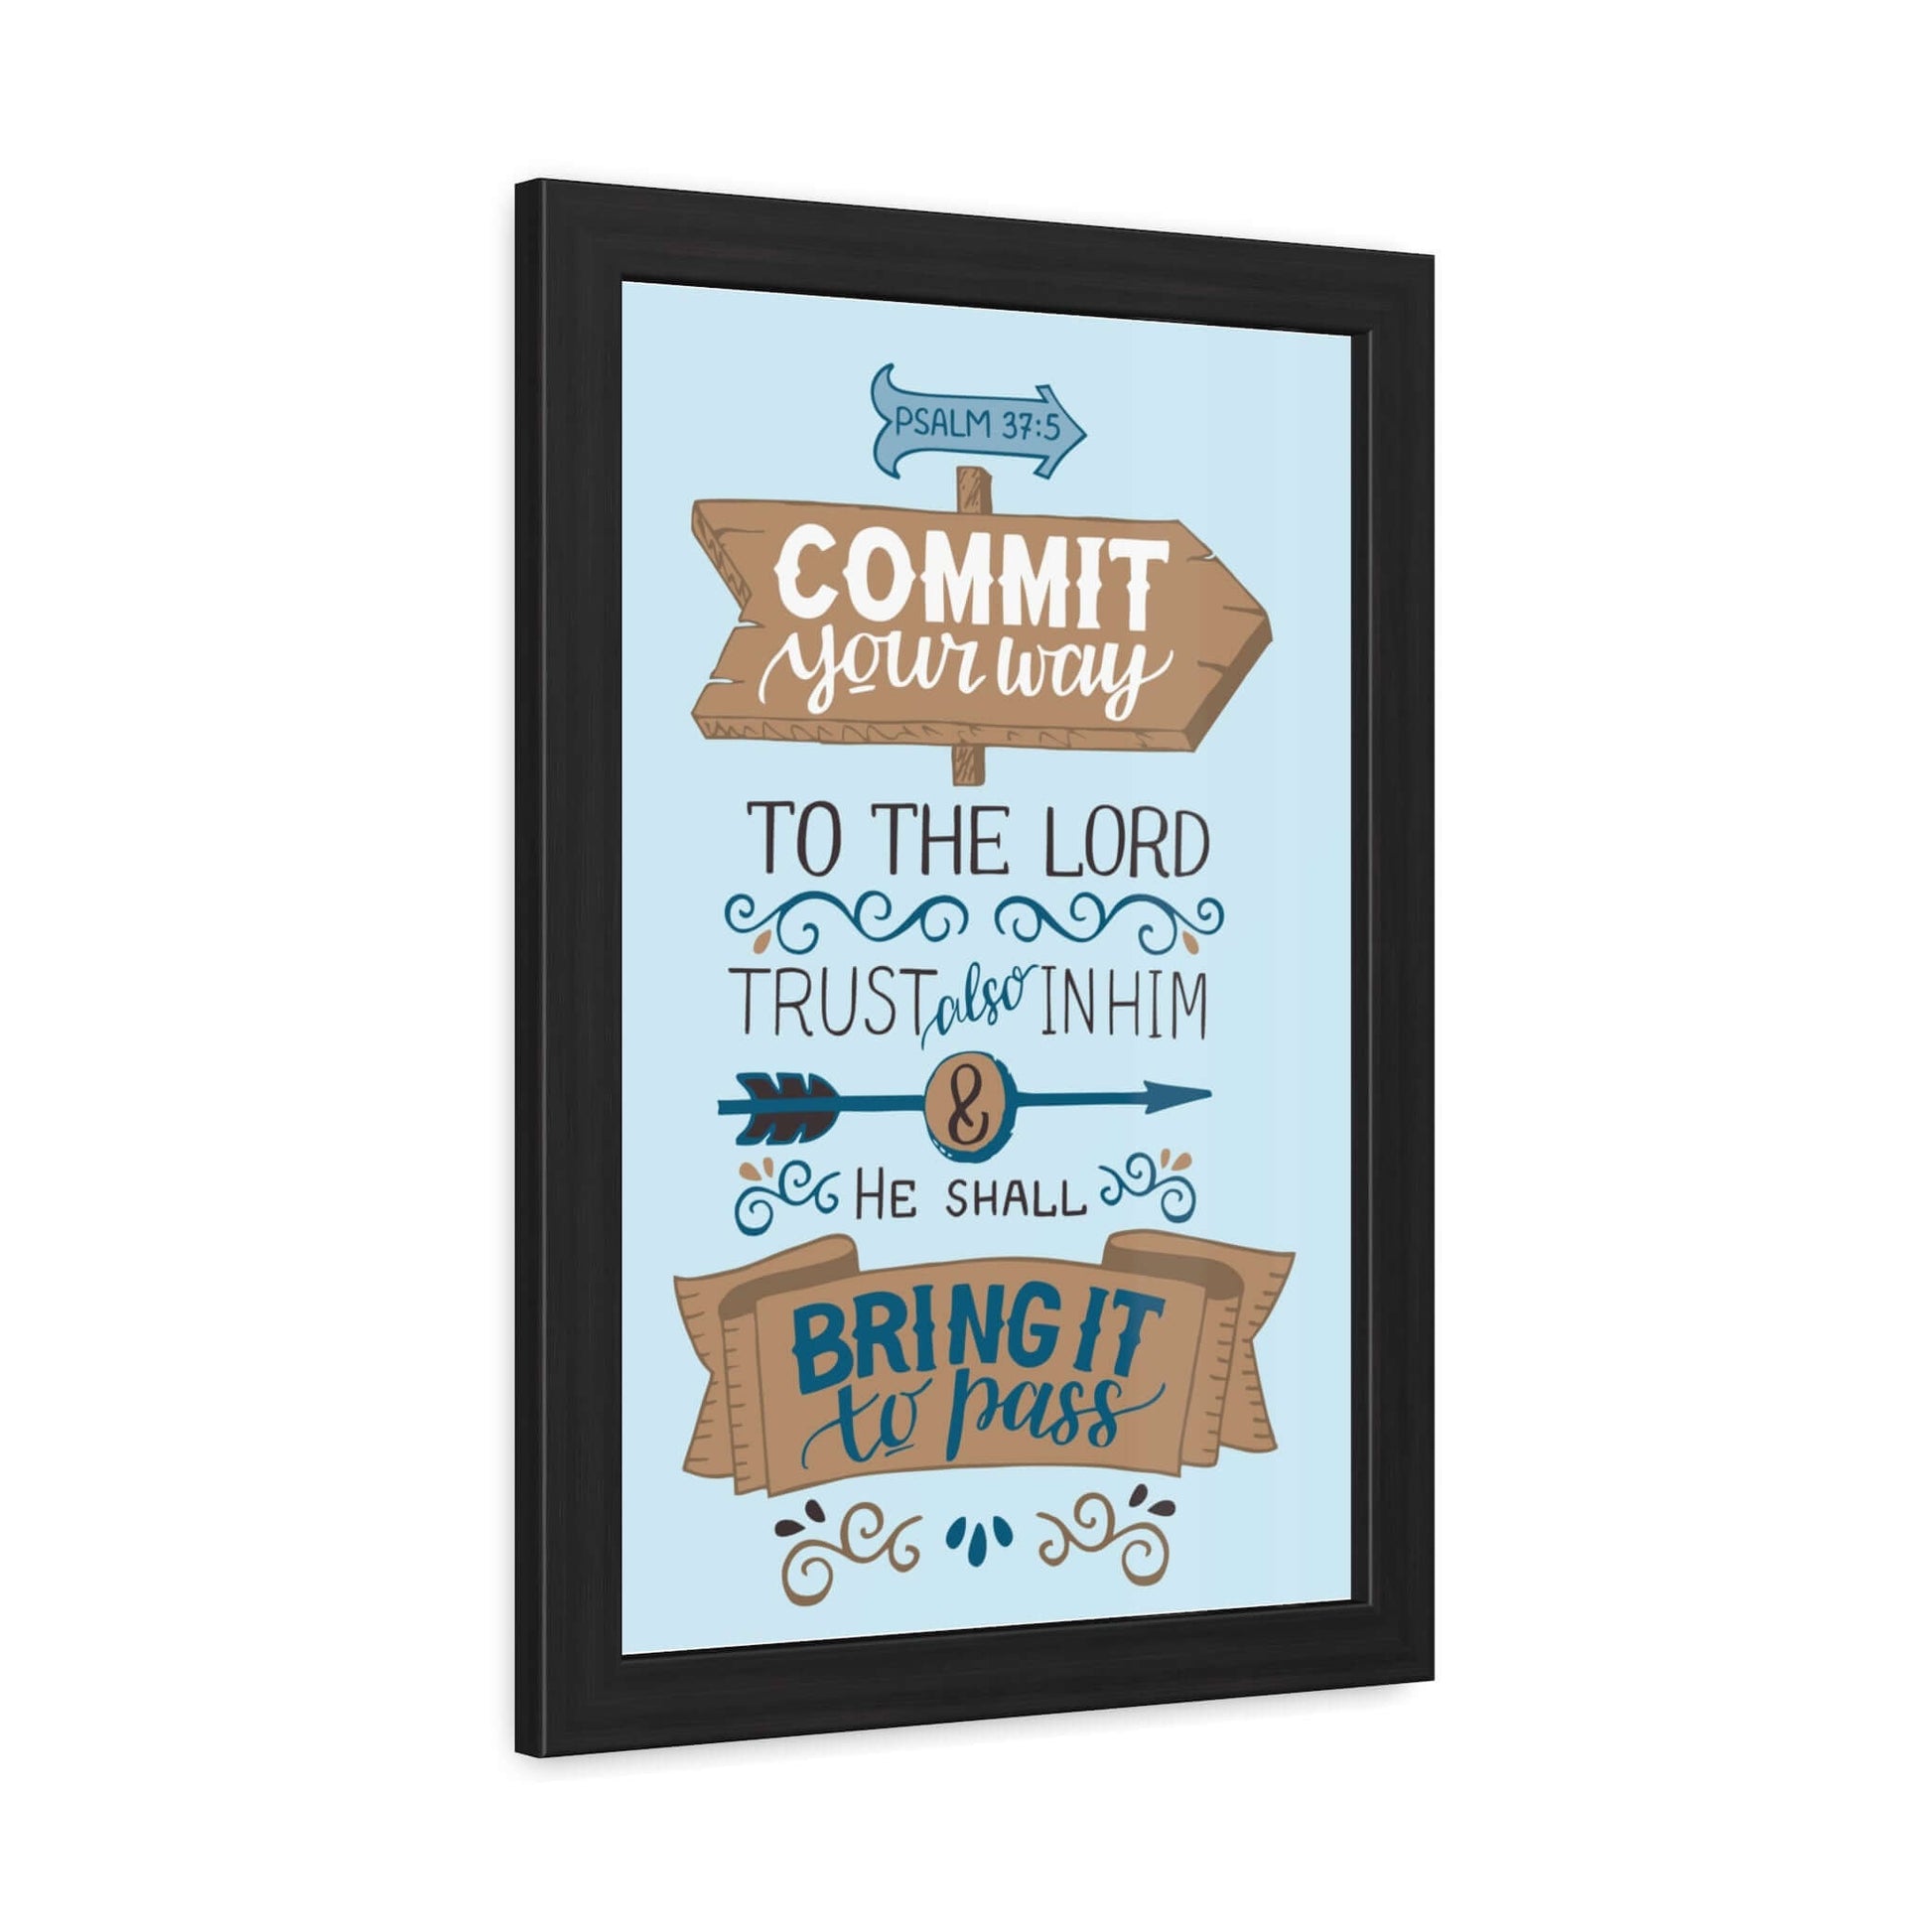 Poster Framed with Hand-Crafted Wooden Frame - Featuring Psalm 37:5 | Art & Wall Decor,Framed,Hanging Hardware,Home & Living,Poster,Posters